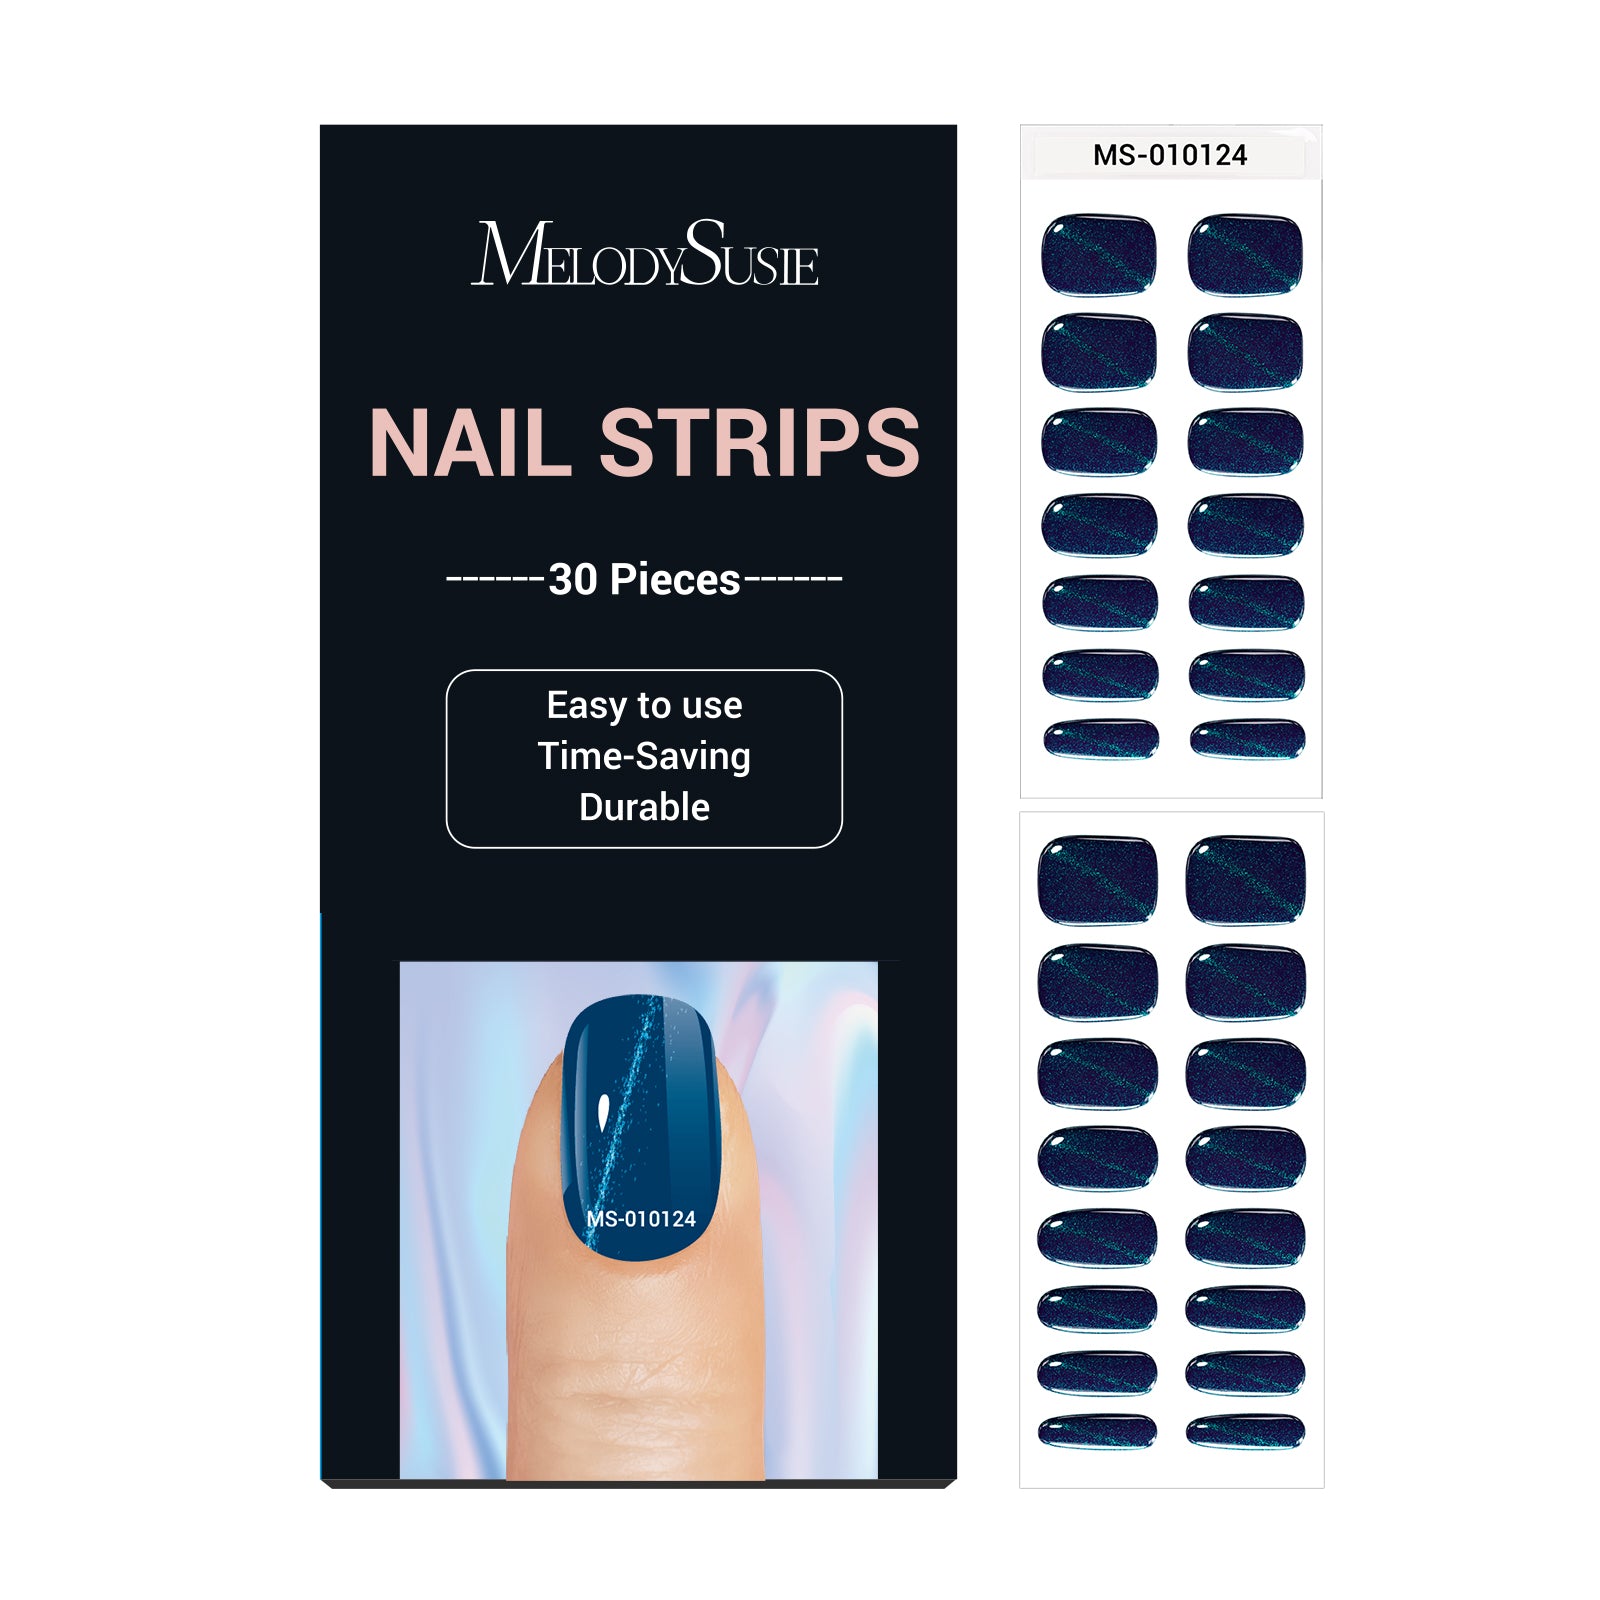 New Semi Cured Gel Nail Strips - US ONLY